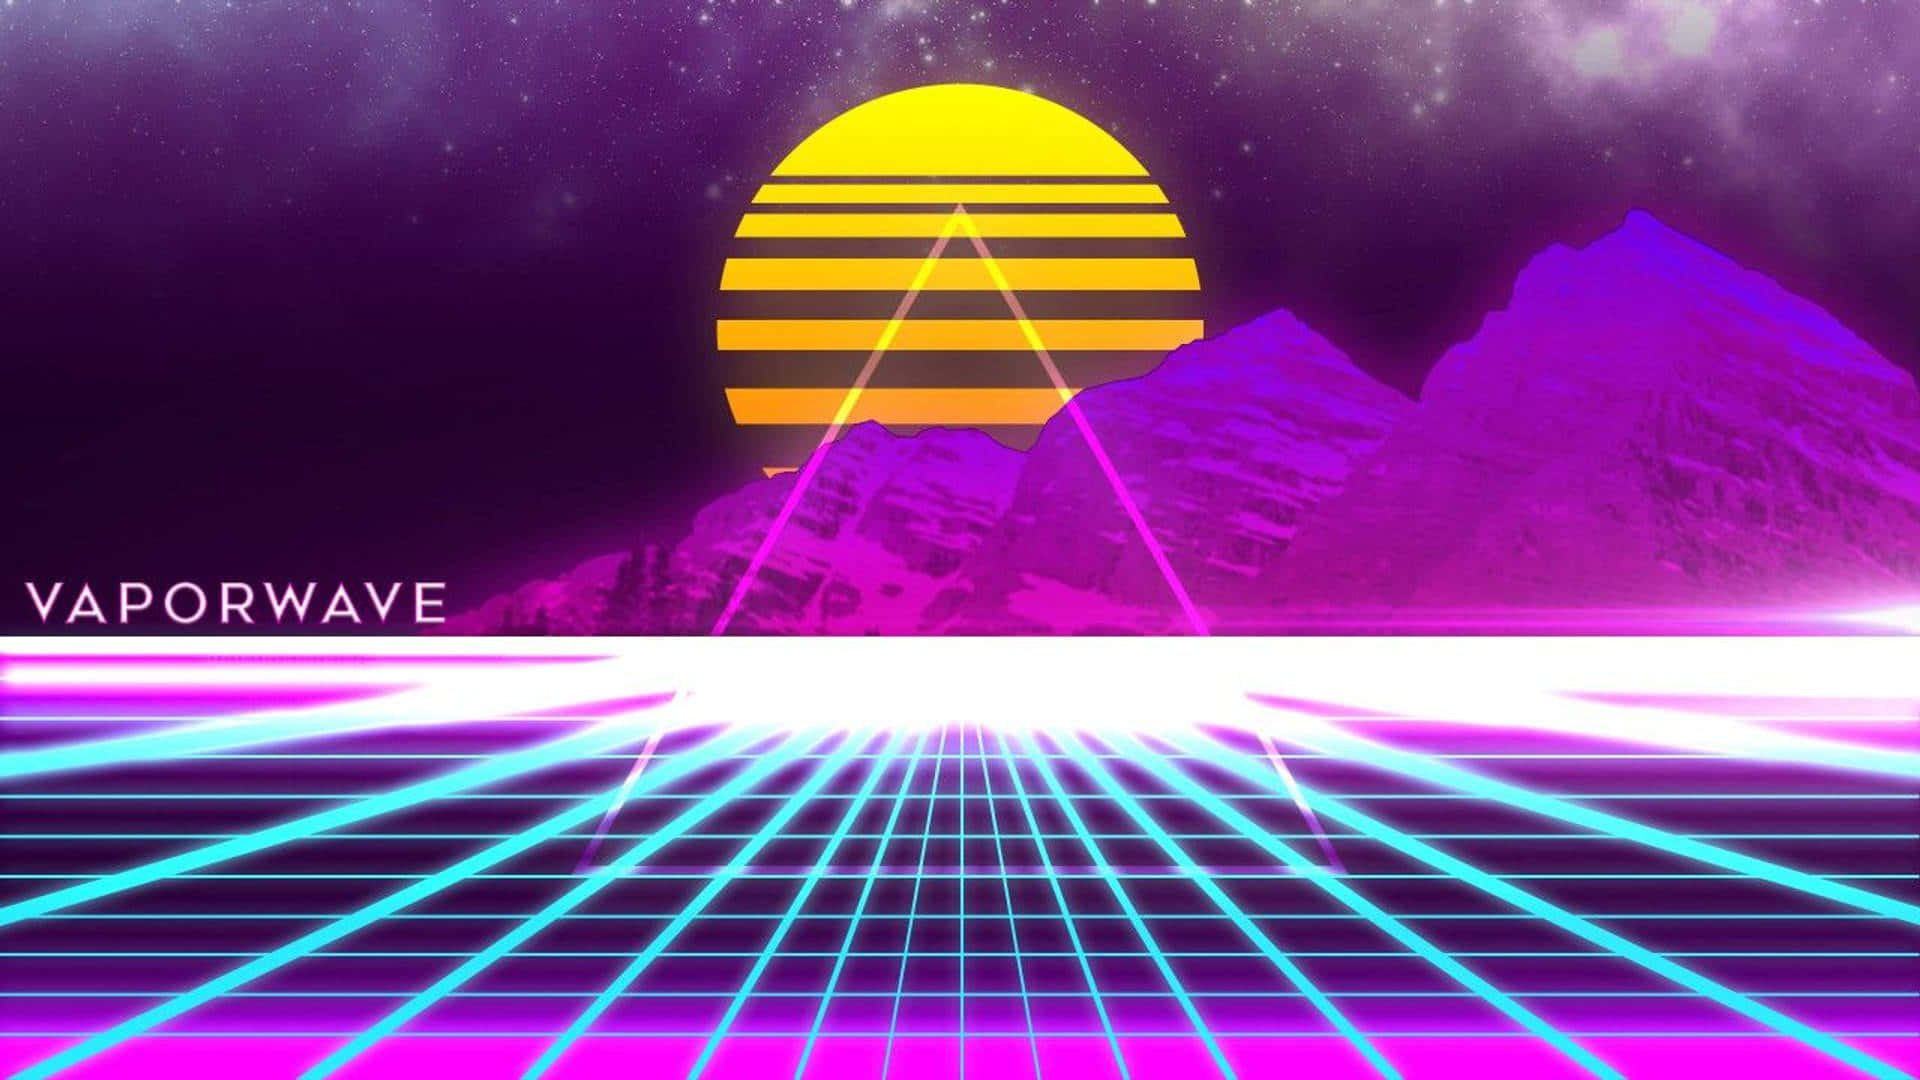 Step into a better future with the revolutionary Vaporwave Tablet Wallpaper